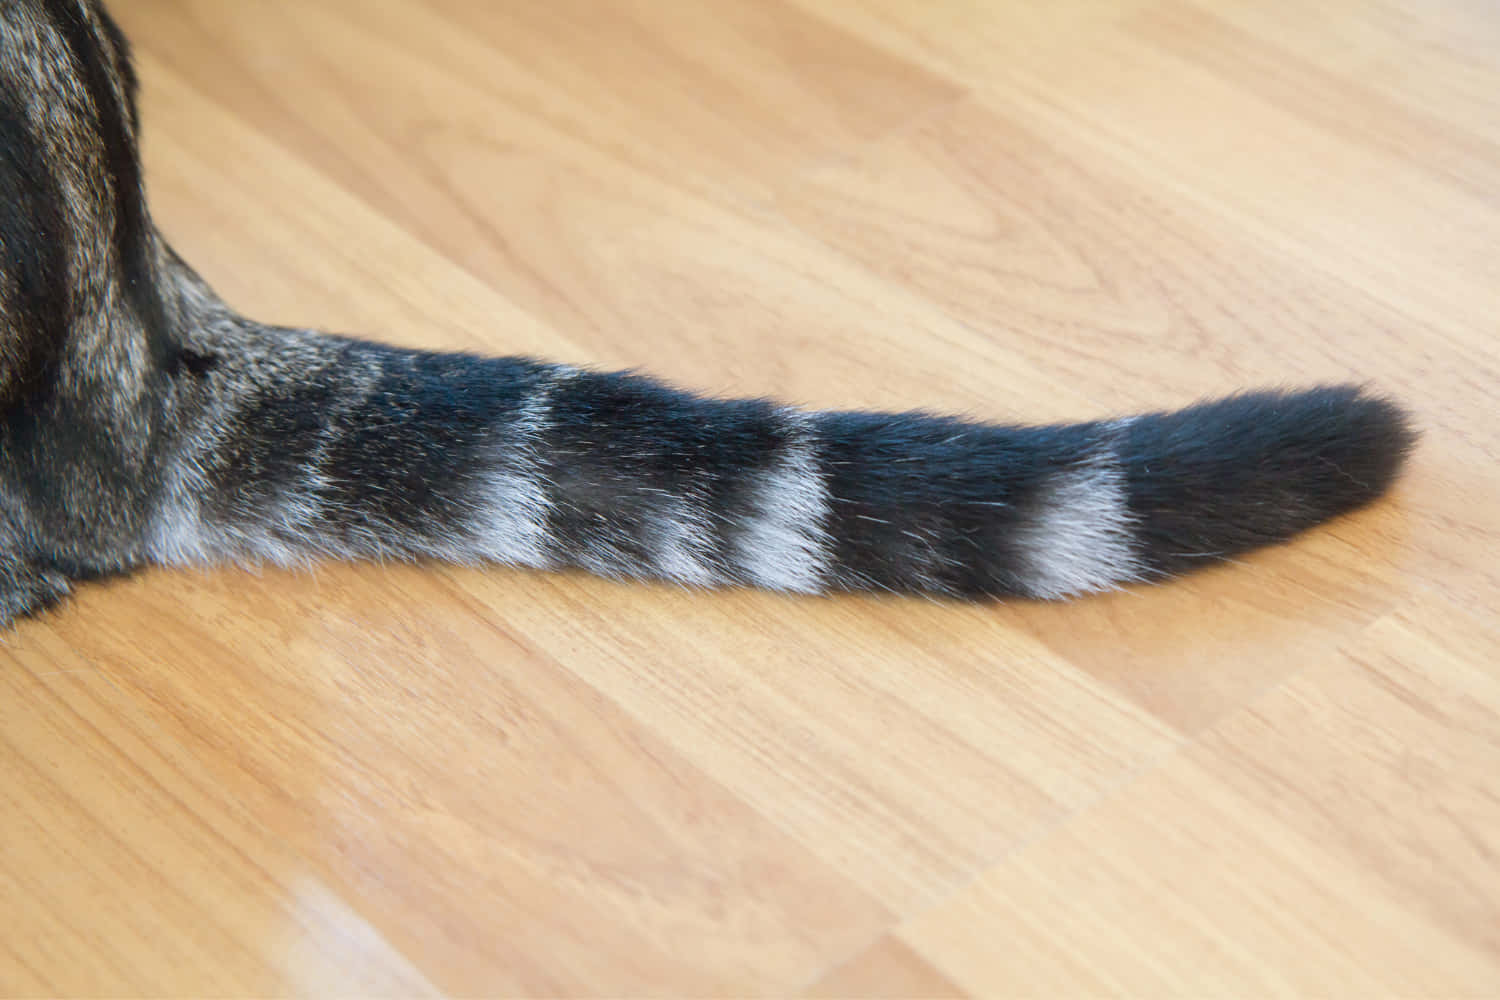 A Cat With A Tail On A Wooden Floor